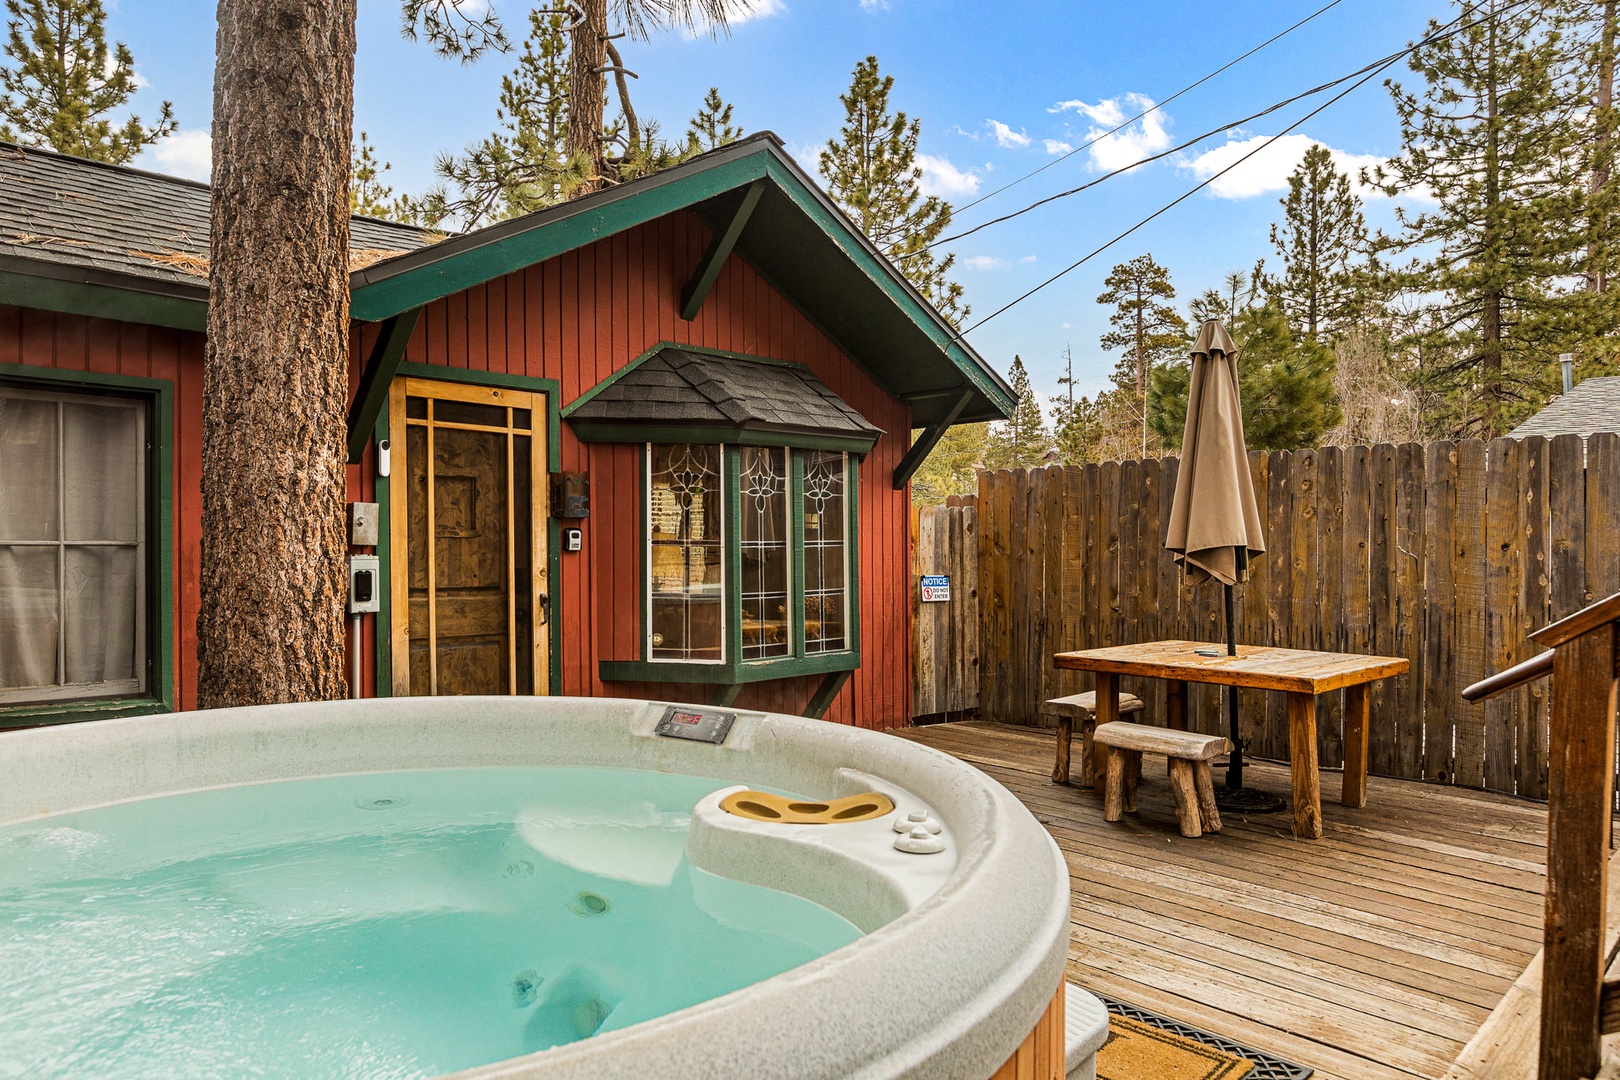 Welcome to Buck Bear Cozy Cabin where rustic charm meets modern comfort